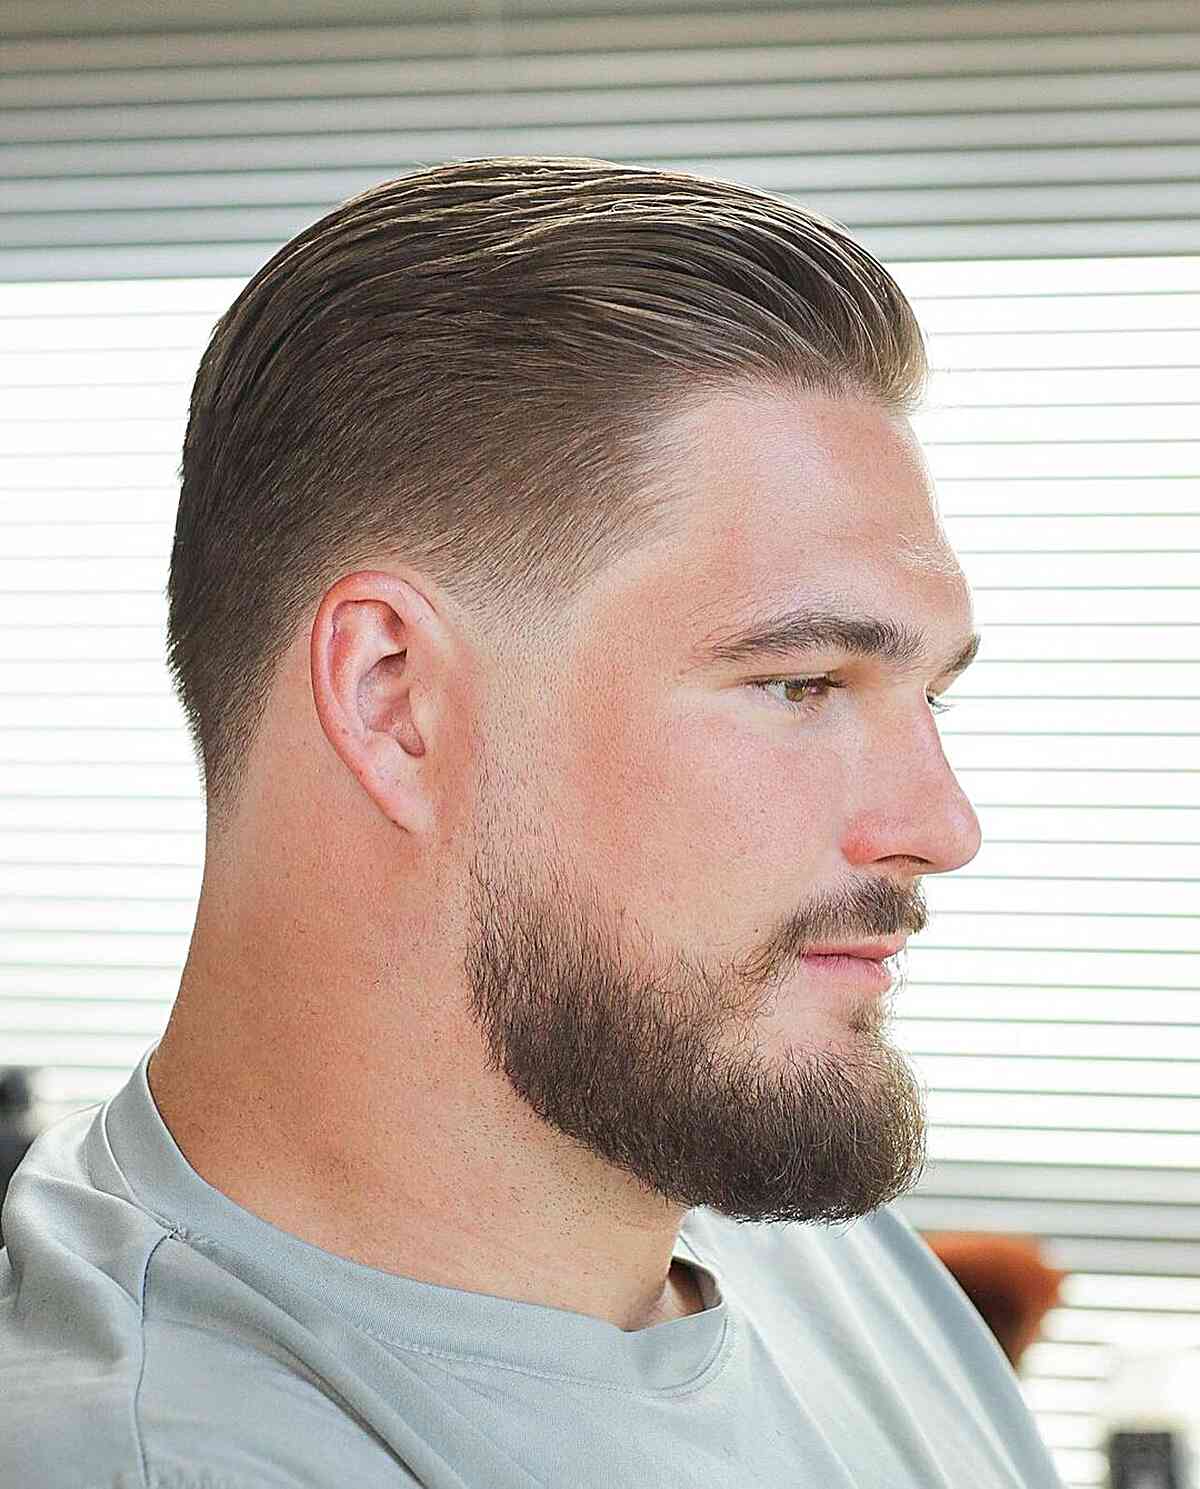 35 Stylish Crew Cut Hairstyles For Men in 2023